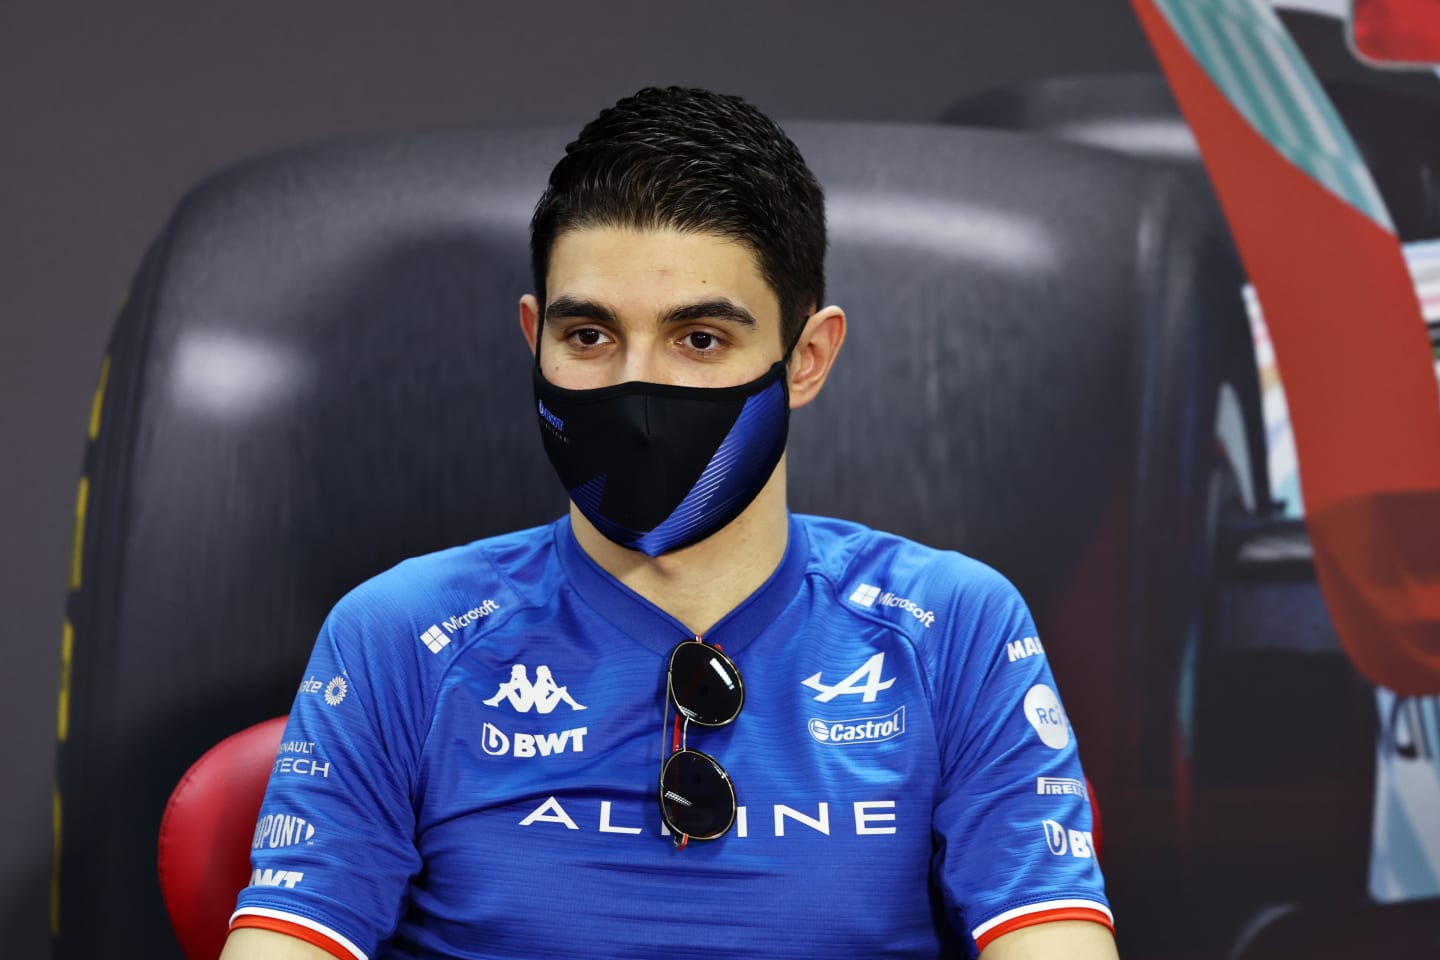 BAHRAIN, BAHRAIN - MARCH 12: Esteban Ocon of France and Alpine F1 looks on in the Drivers Press Conference during Day Three of F1 Testing at Bahrain International Circuit on March 12, 2022 in Bahrain, Bahrain. (Photo by Mark Thompson/Getty Images)